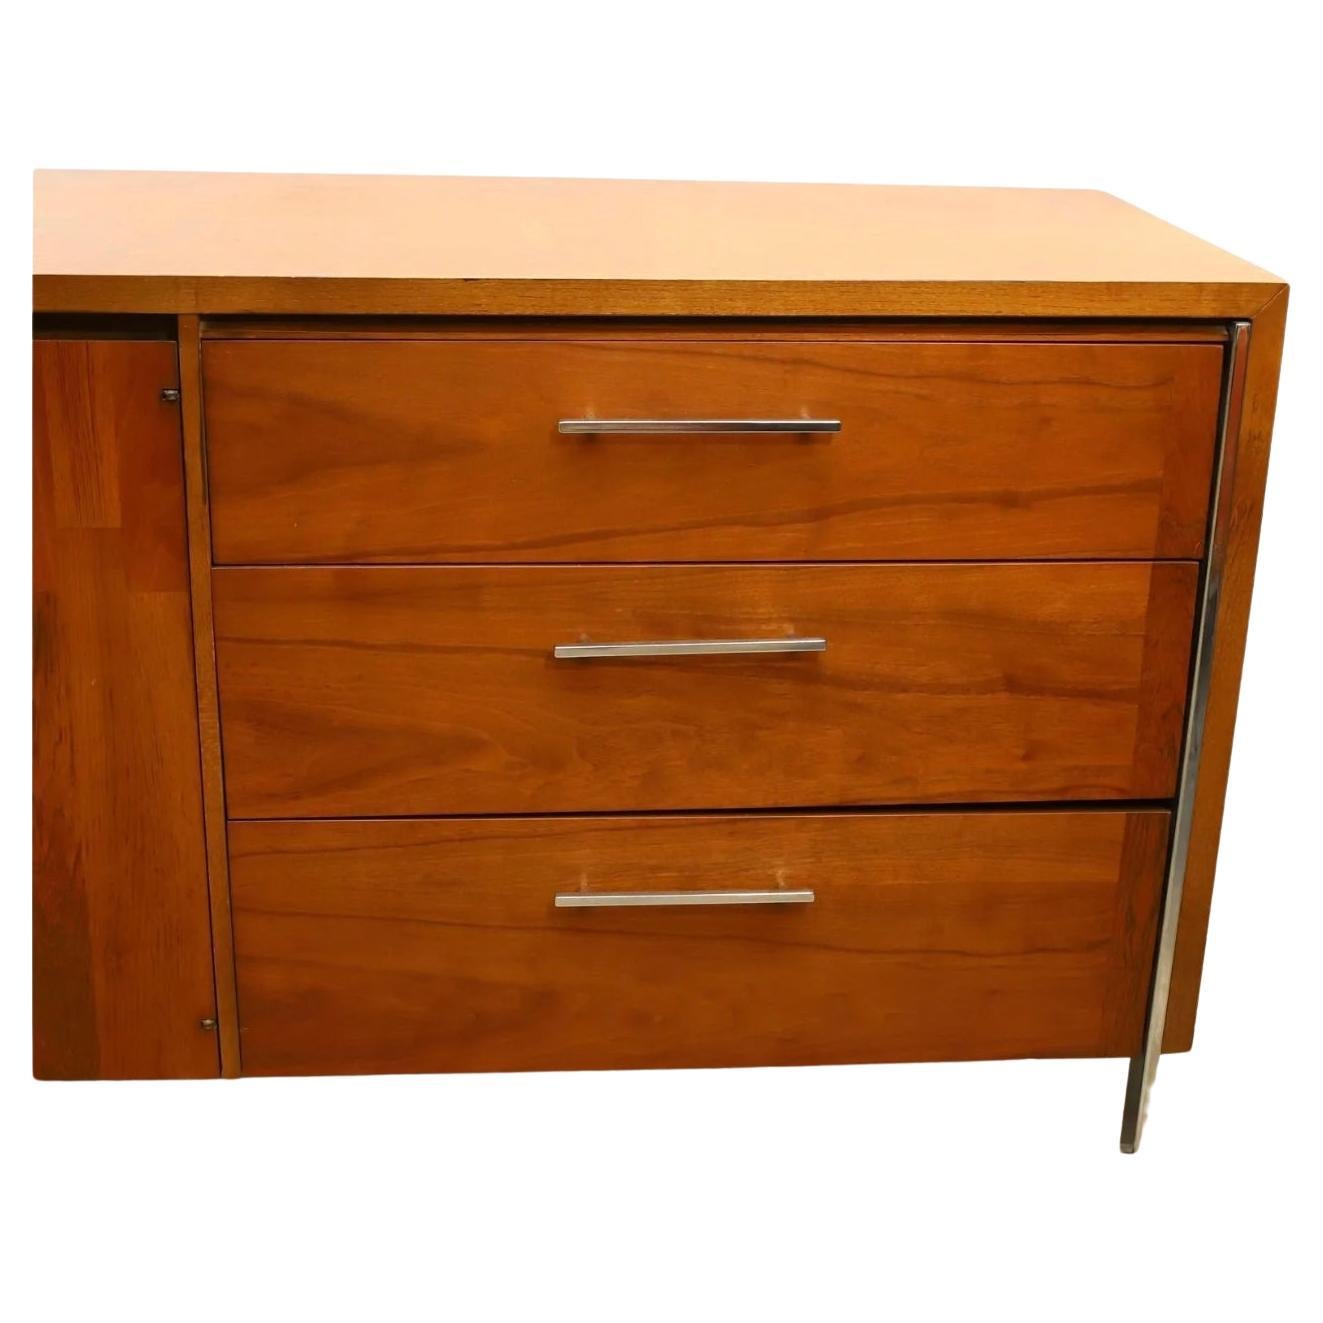 American Mid Century Modern Lane 9 Drawer 2 door Walnut Credenza with Chrome legs For Sale